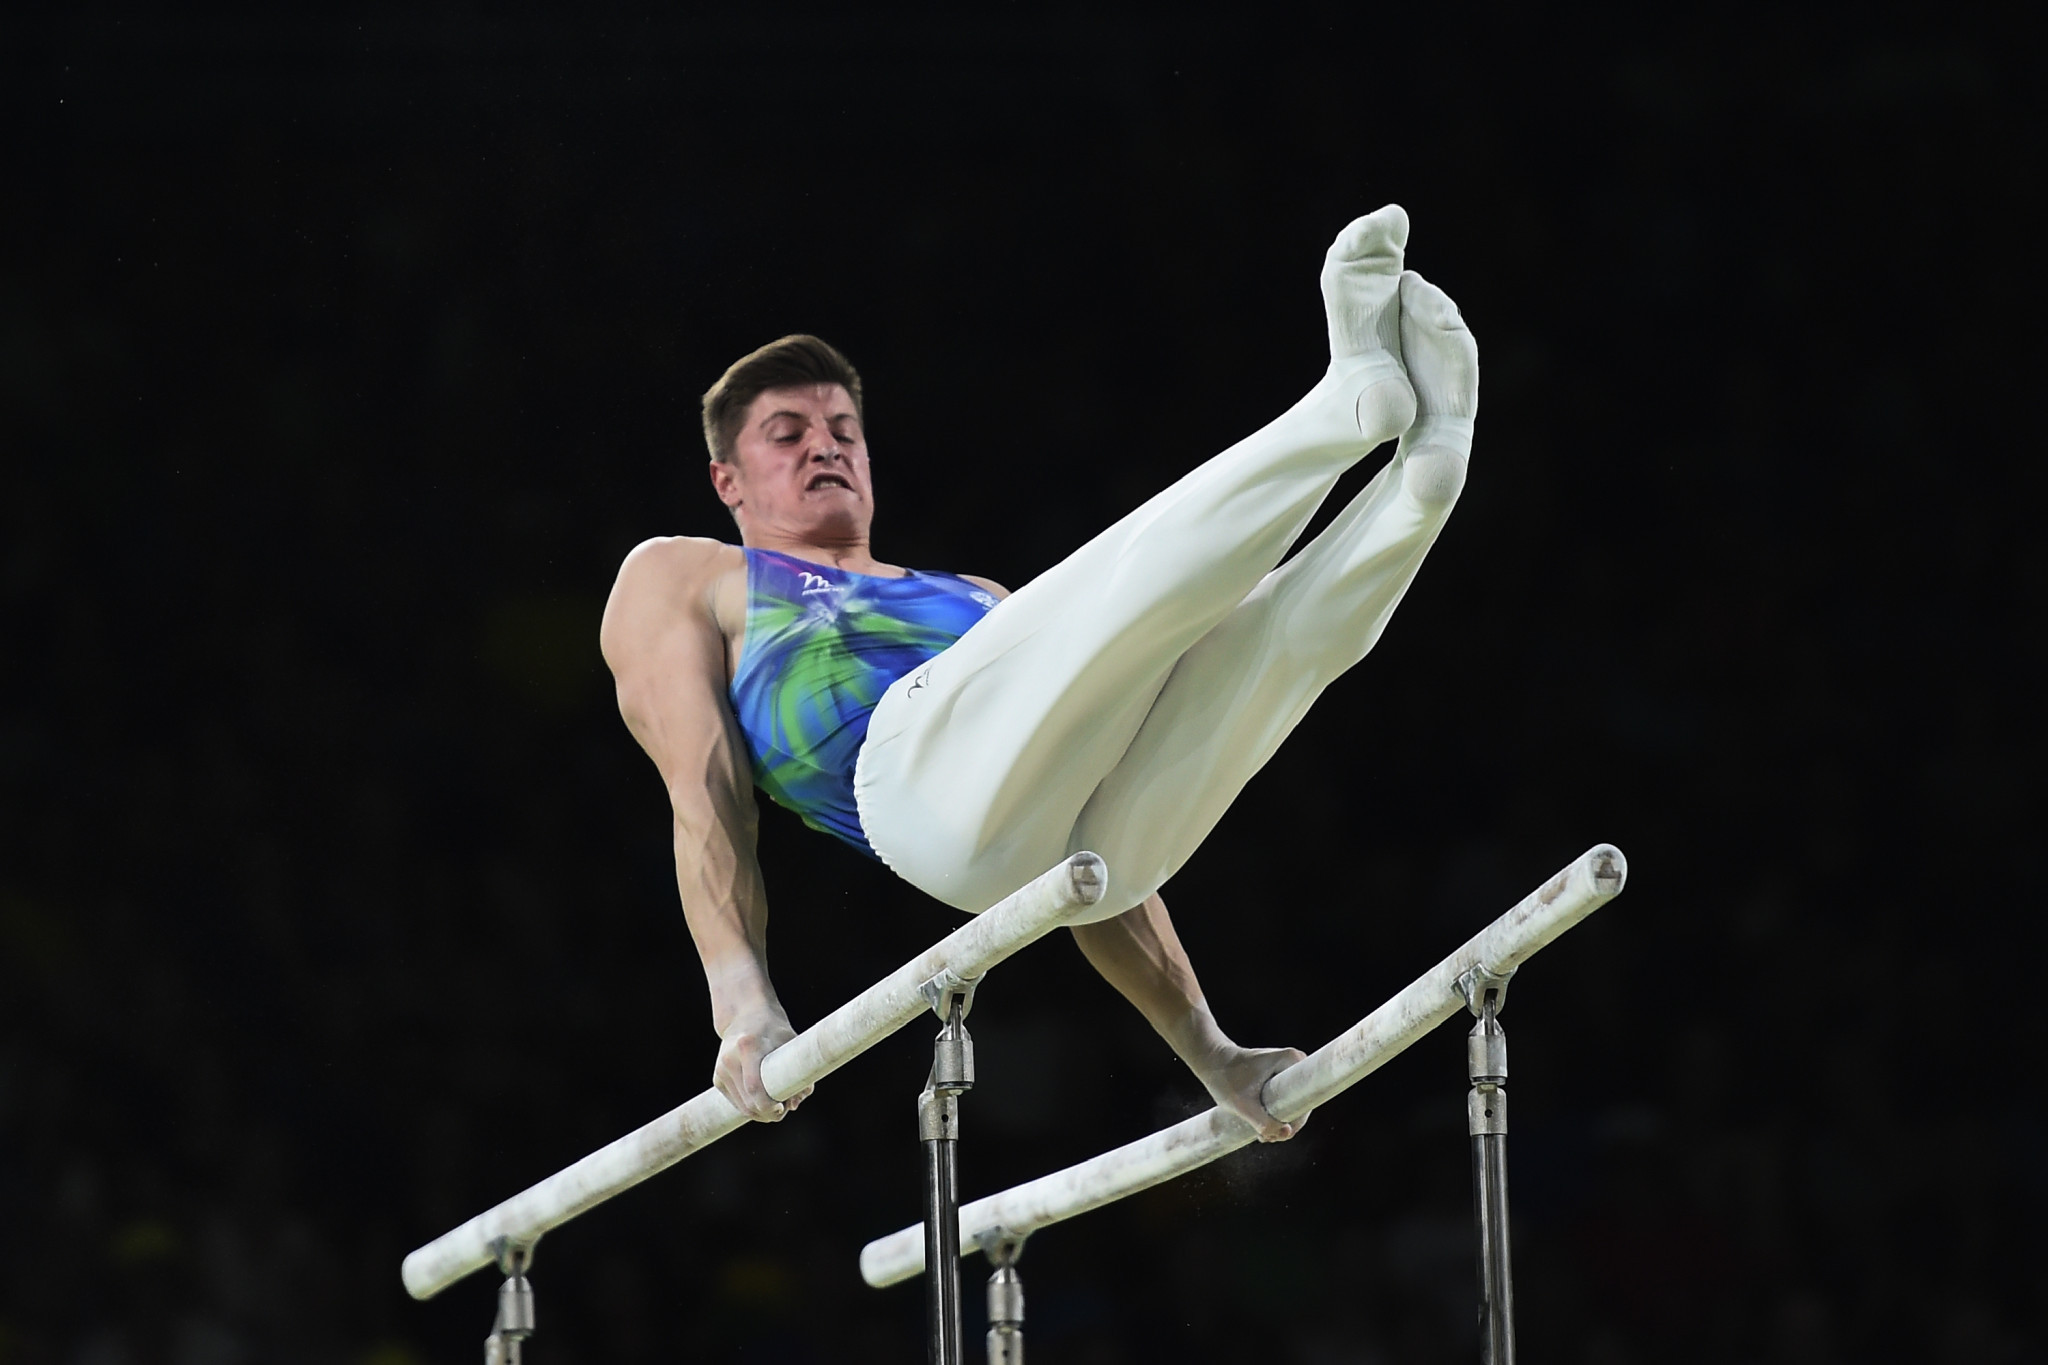 Scotland's 2014 Commonwealth Games silver medallist Frank Baines has come out of retirement to compete at Birmingham 2022 ©Getty Images